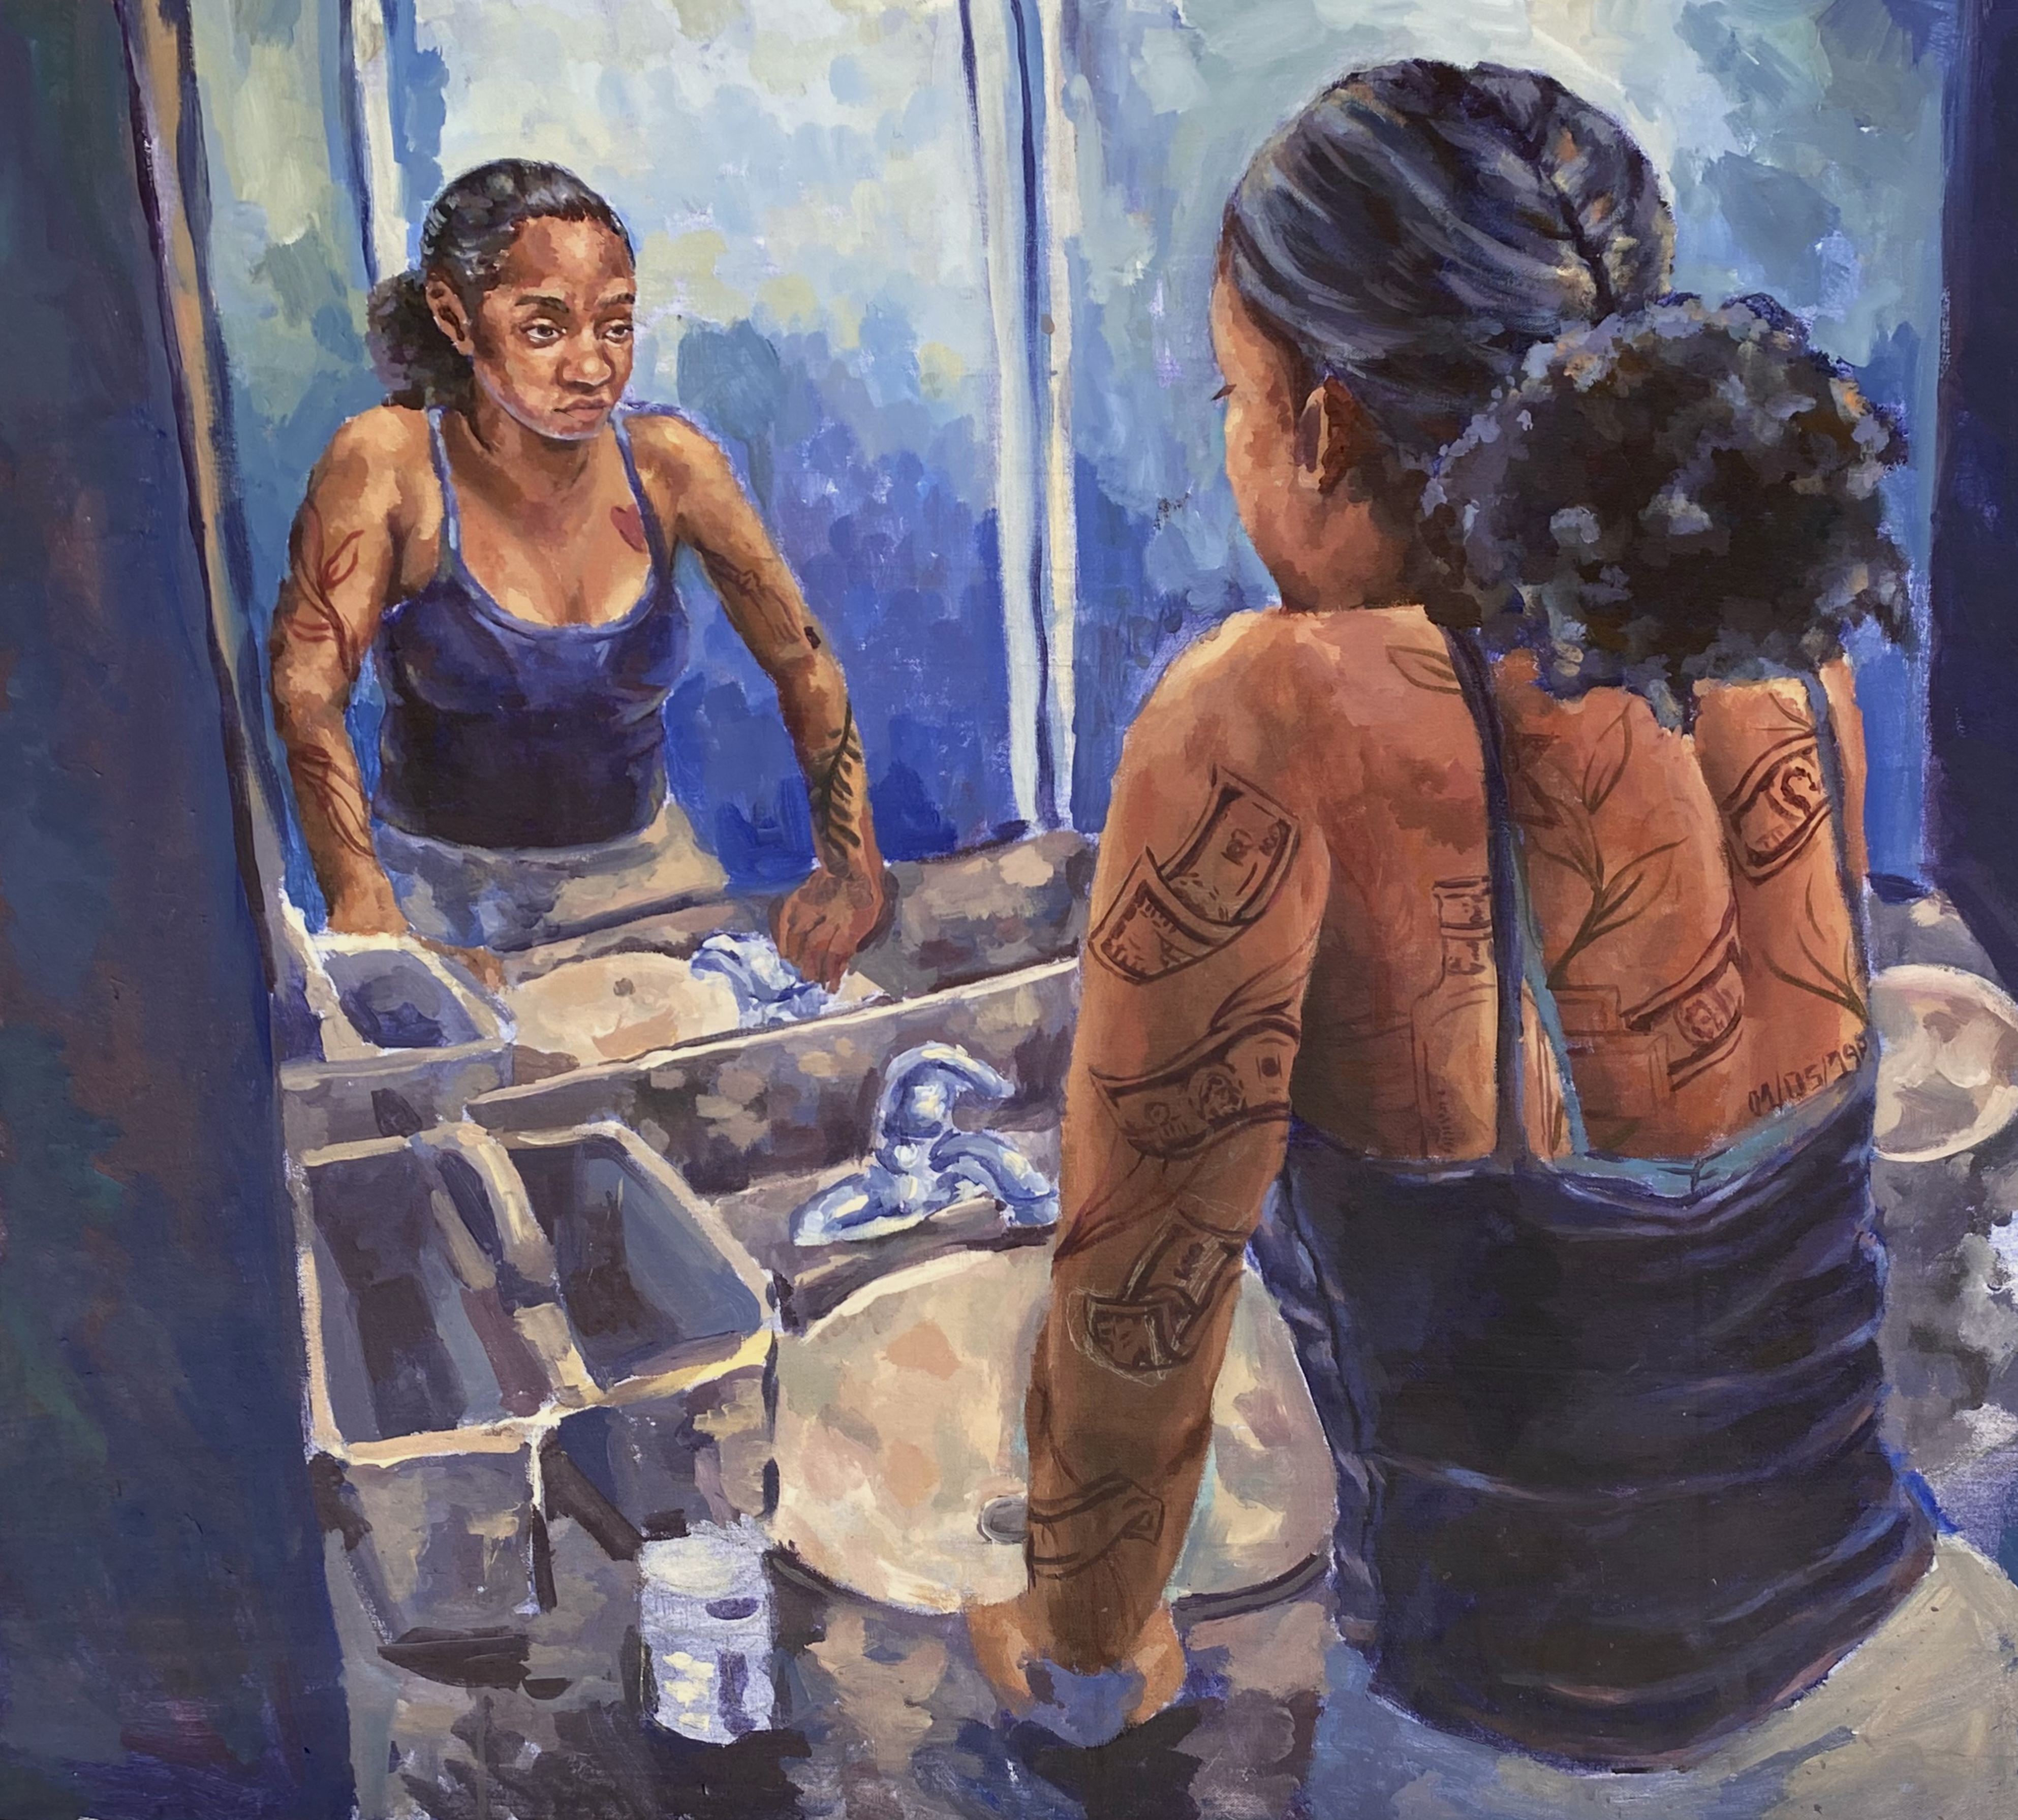 A young black woman looks into a bathroom mirror in this student art painting